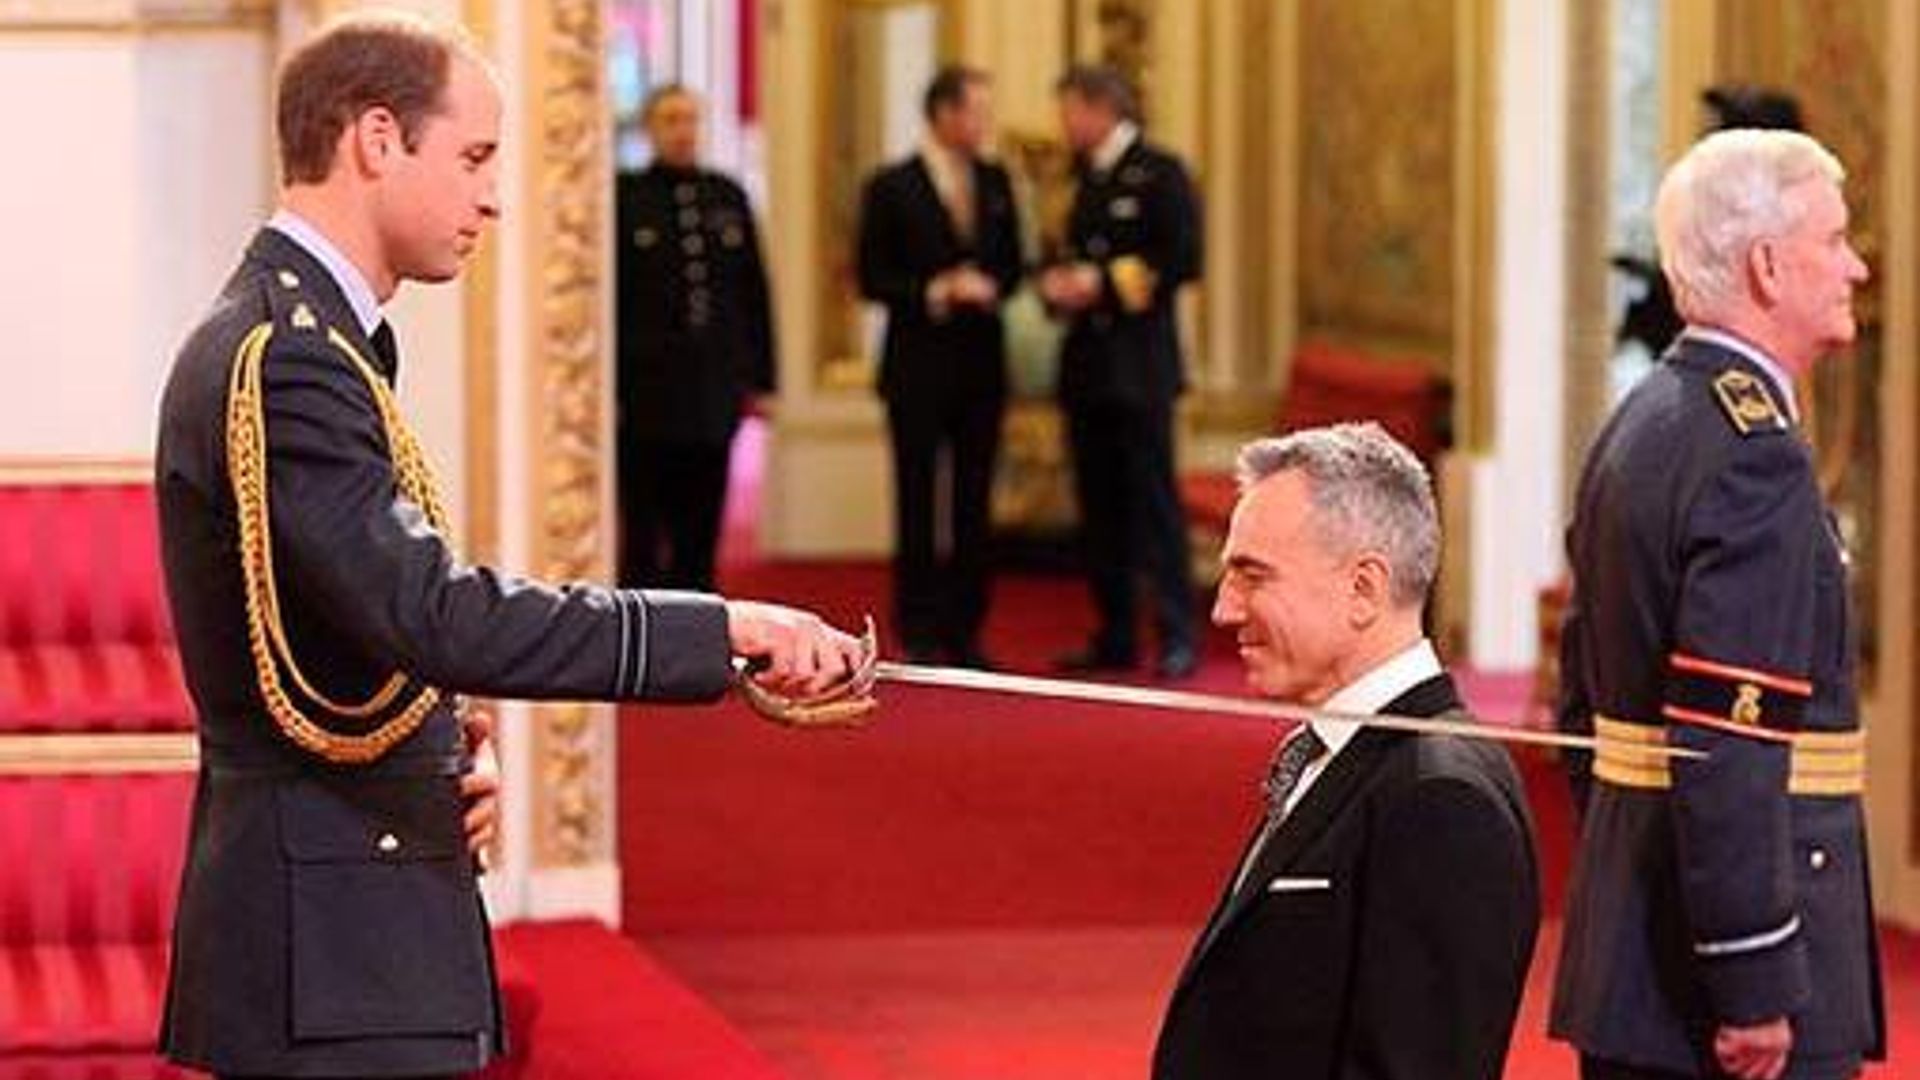 Prince William knights actor Daniel Day-Lewis